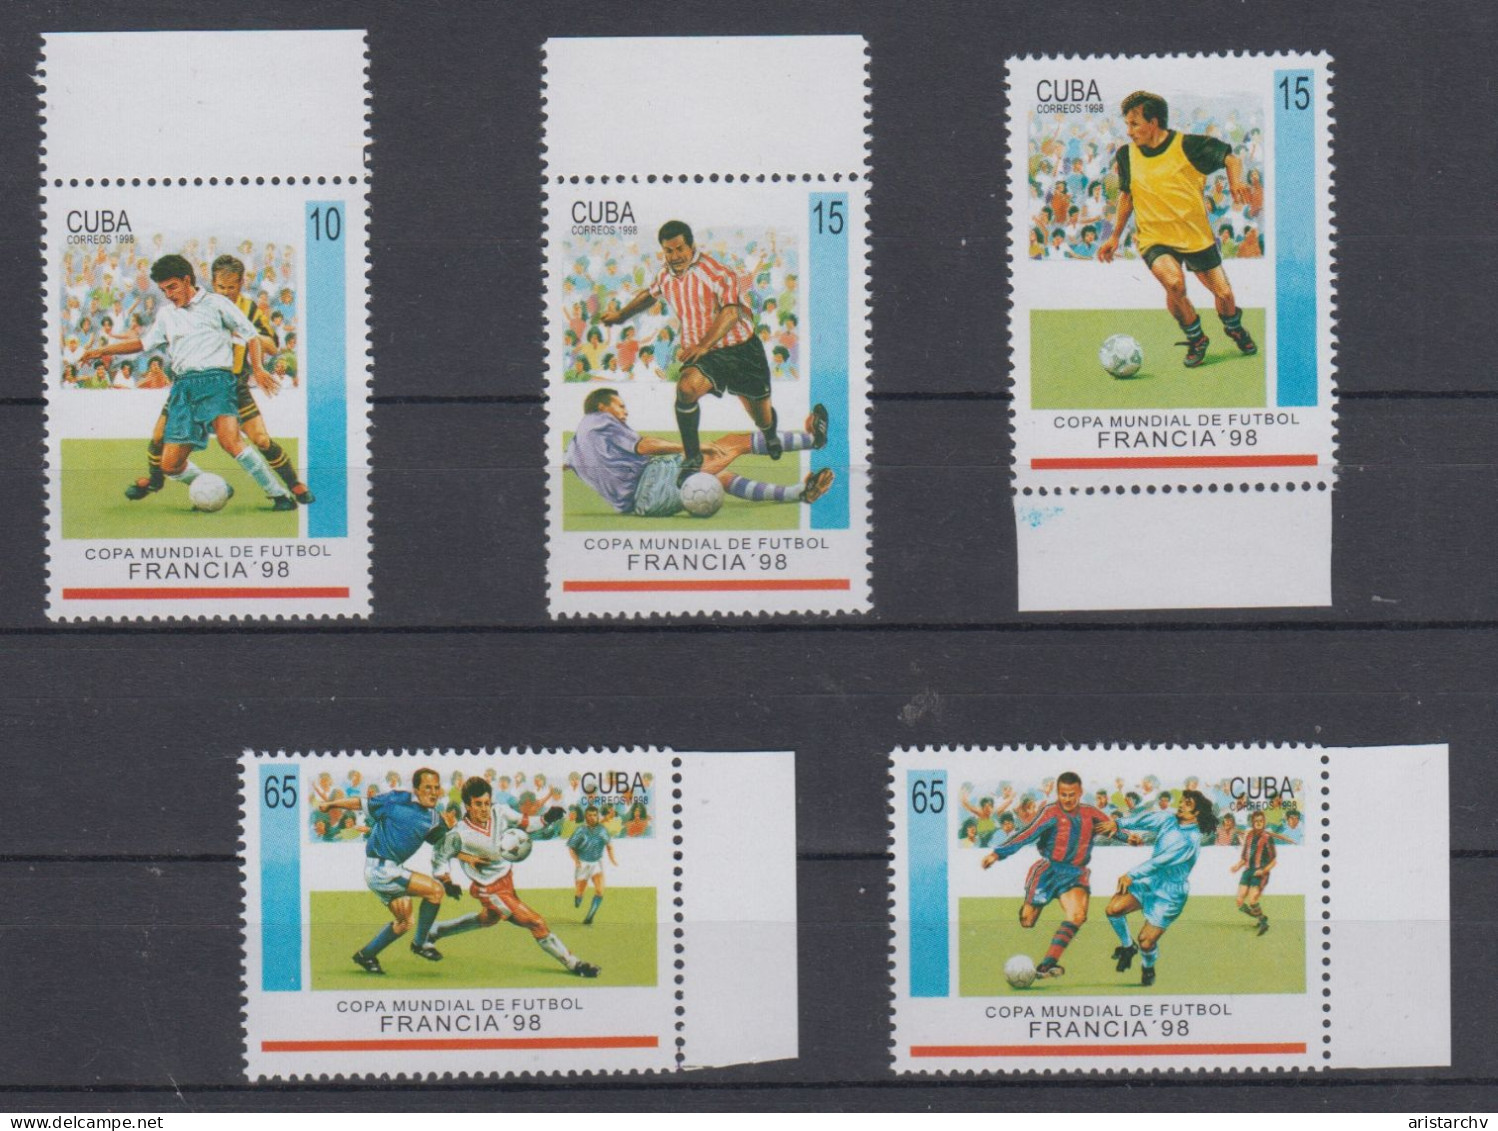 CUBA 1998 FOOTBALL WORLD CUP S/SHEET AND 5 STAMPS - 1998 – Francia